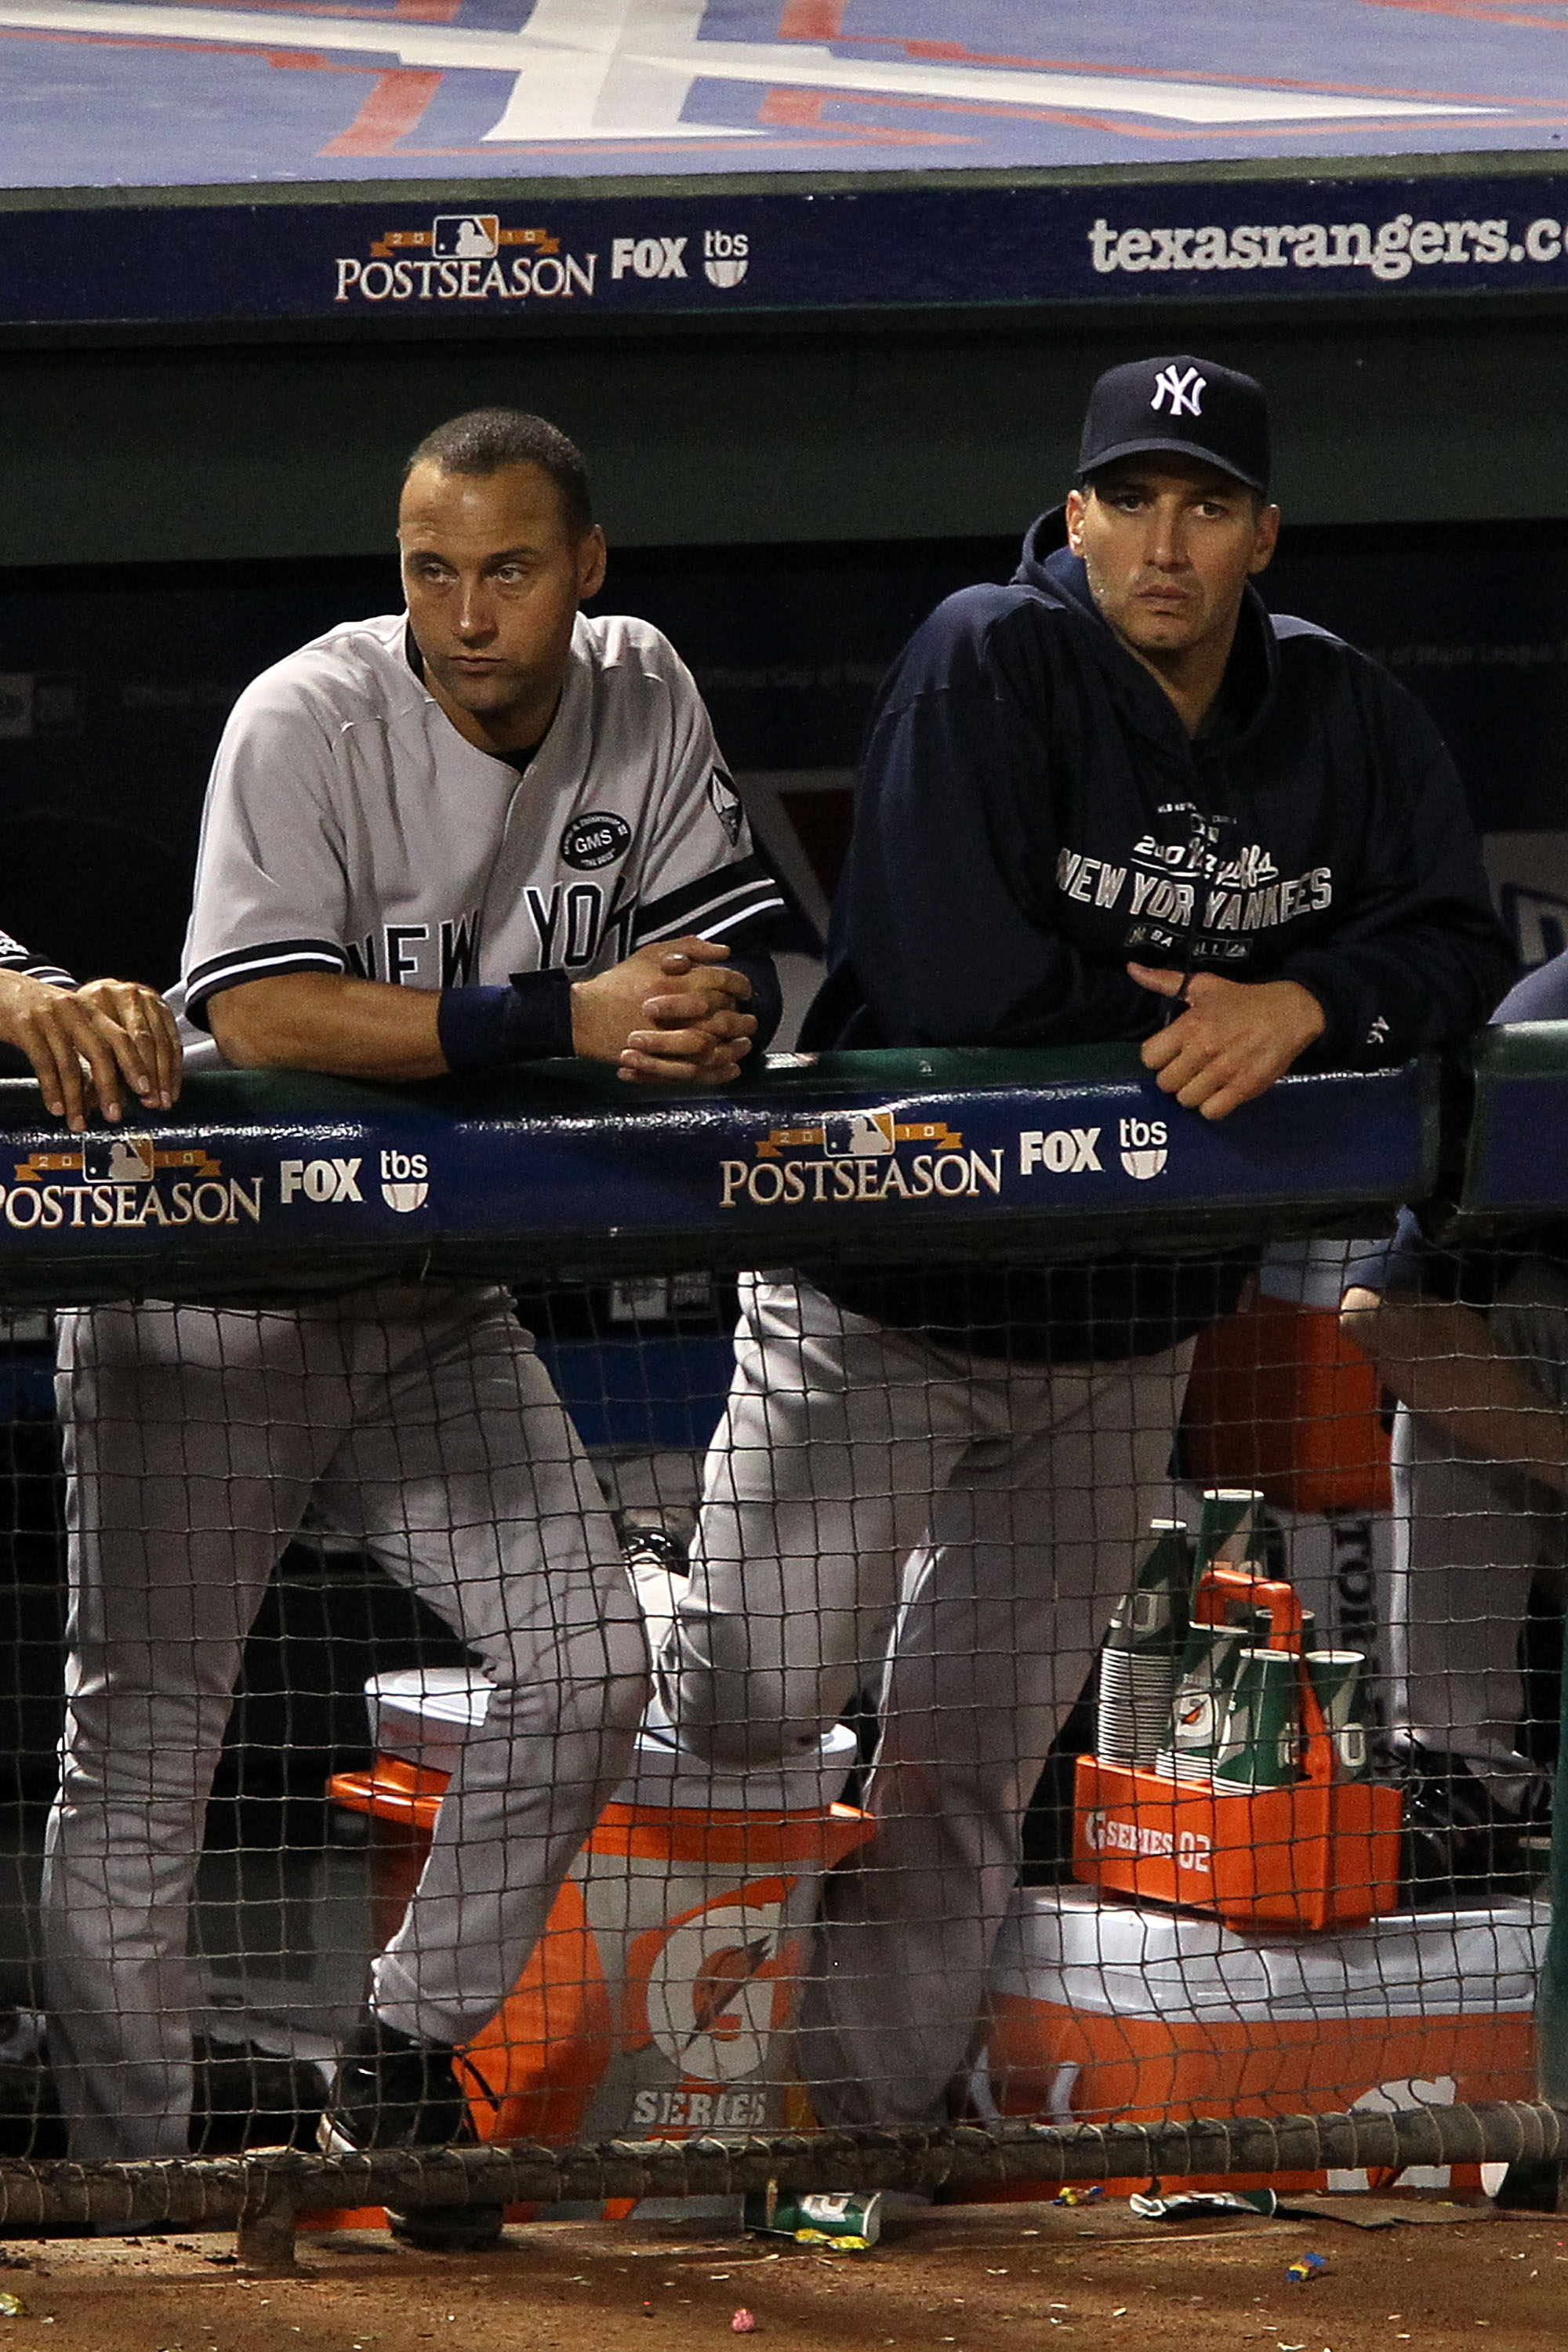 ARLINGTON, TX - OCTOBER 22:  Derek Jeter #2 and Andy Pettitte #46 of the New York Yankees look on from the dugout in Game Six of the ALCS against the Texas Rangers during the 2010 MLB Playoffs at Rangers Ballpark in Arlington on October 22, 2010 in Arling